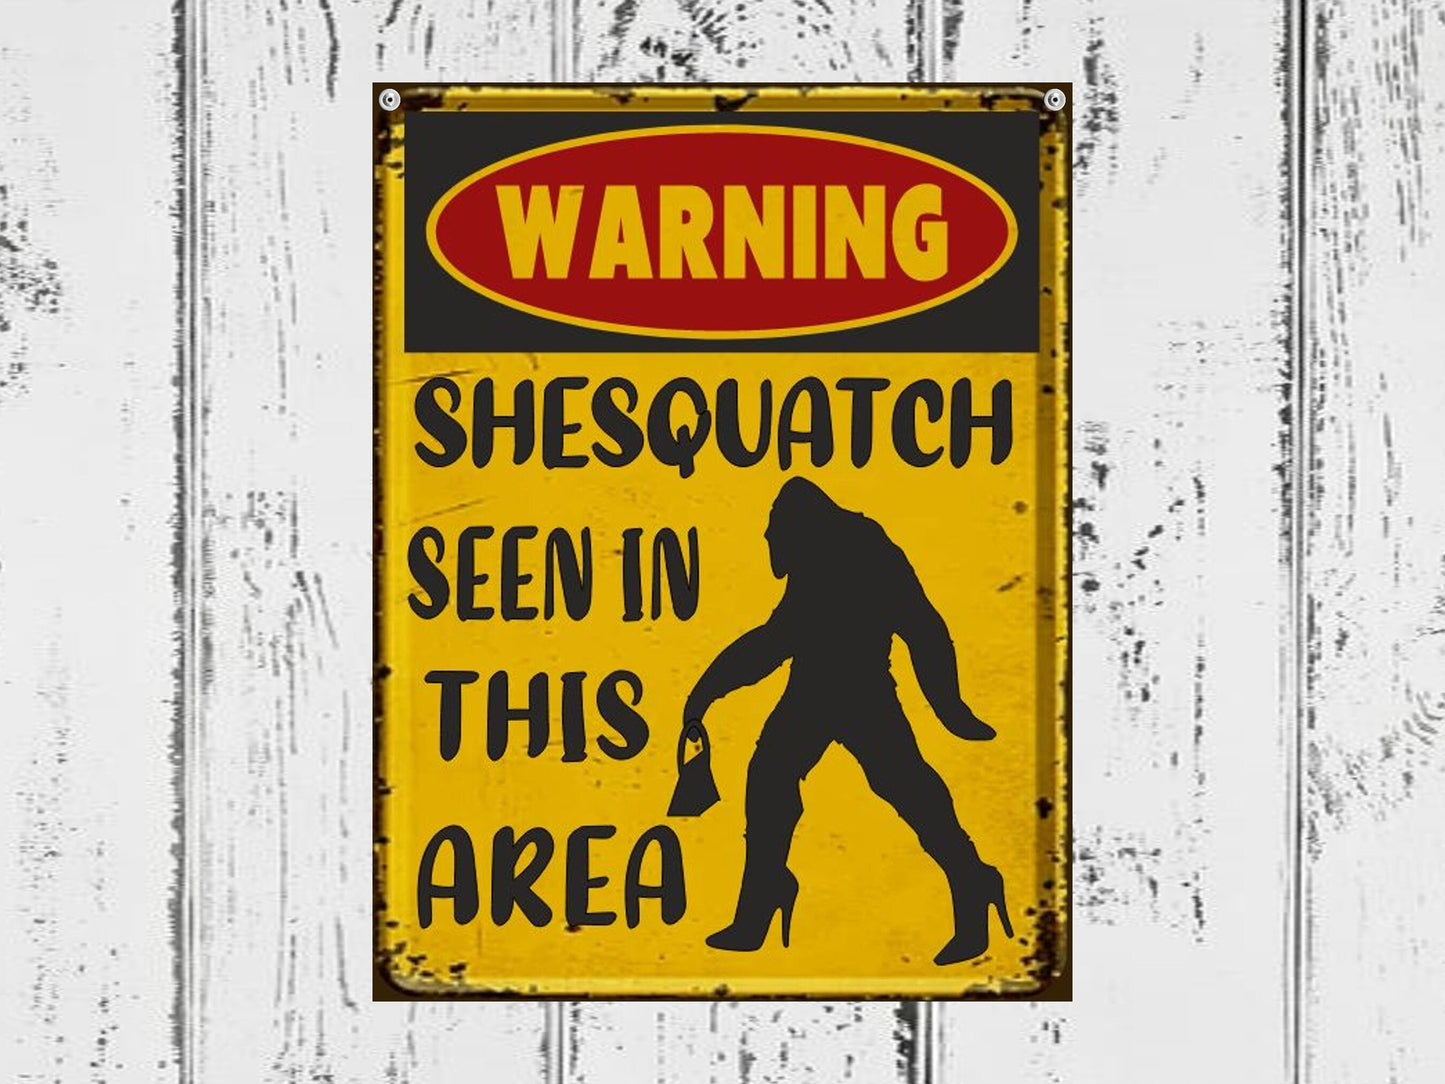 sasquatch warning sign shesquatch seen in this area